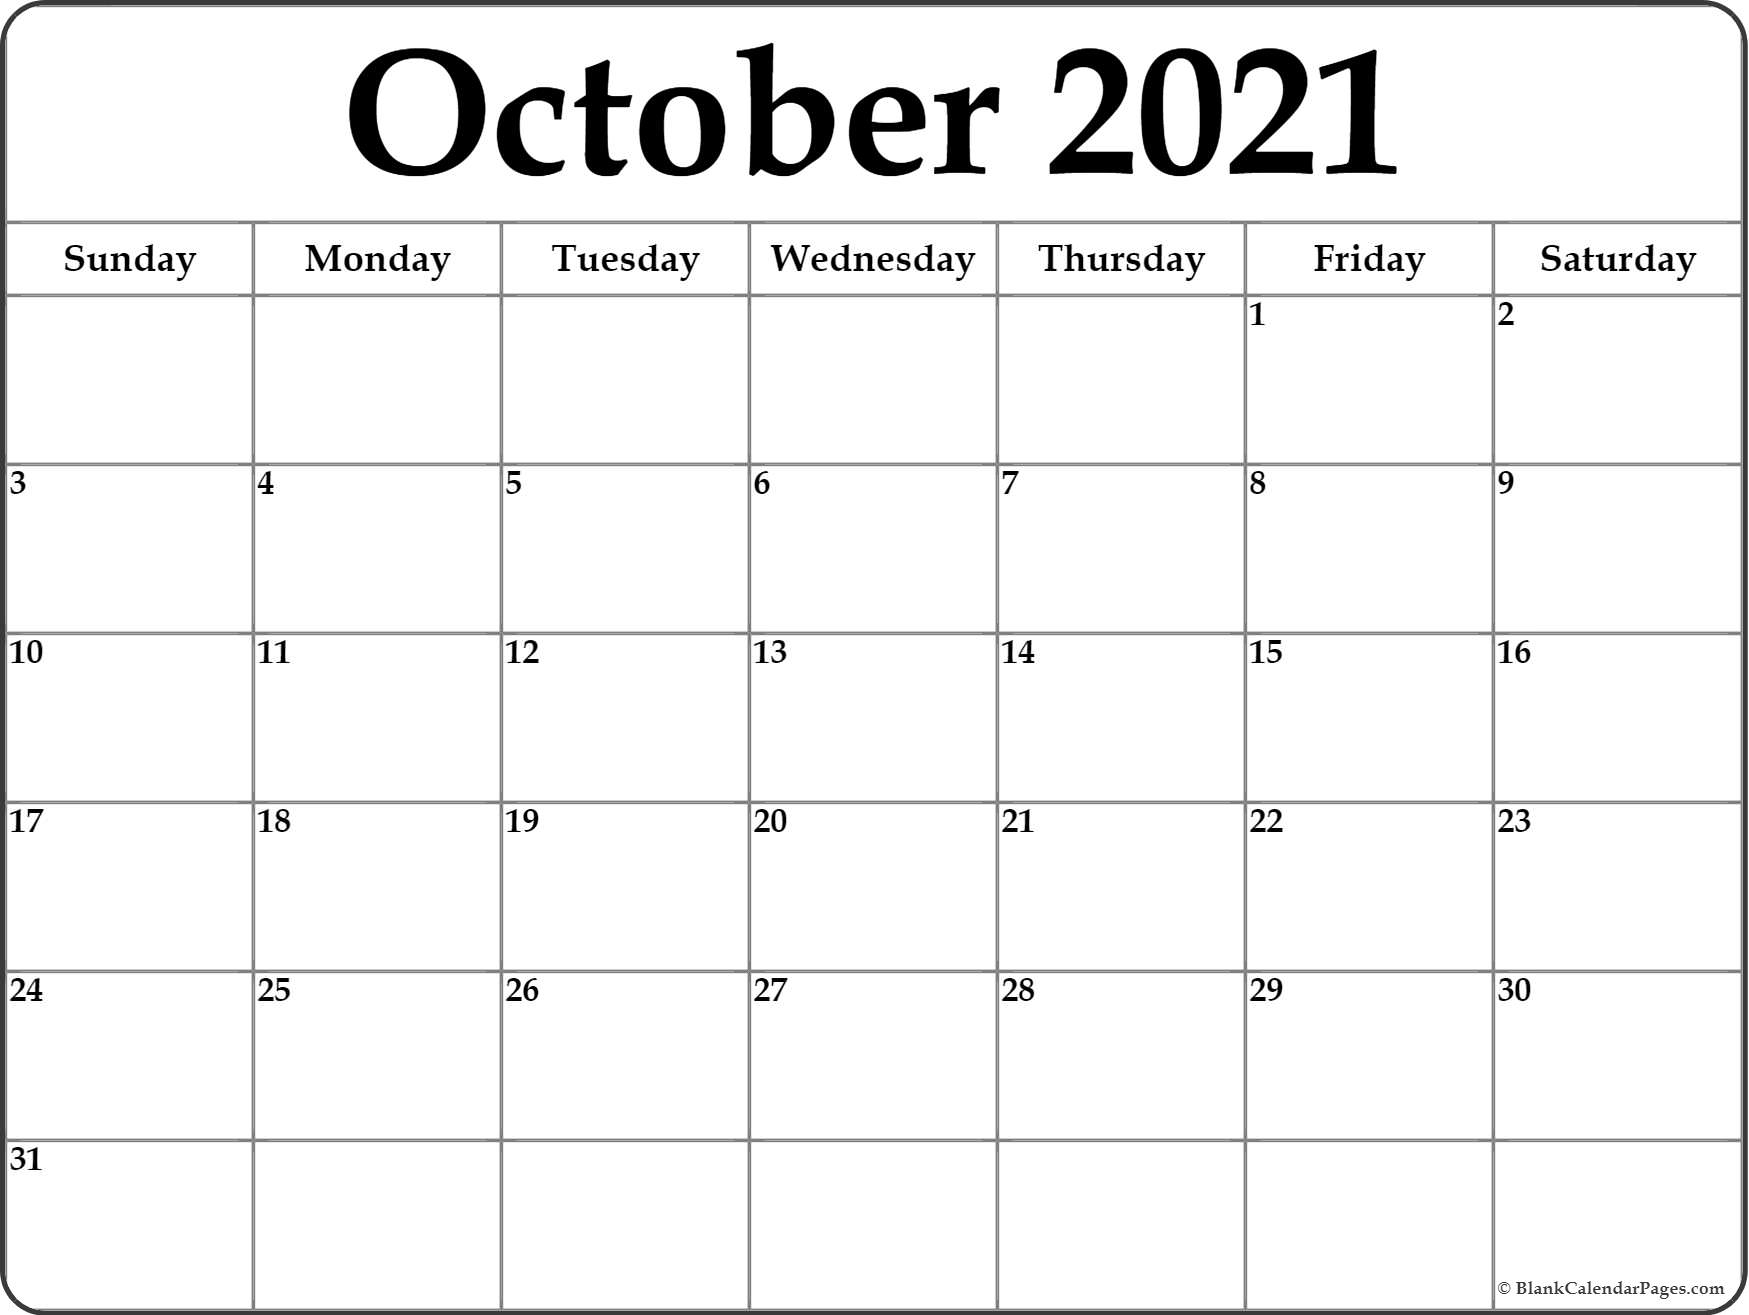 Pick August Through October 2021 Calenday